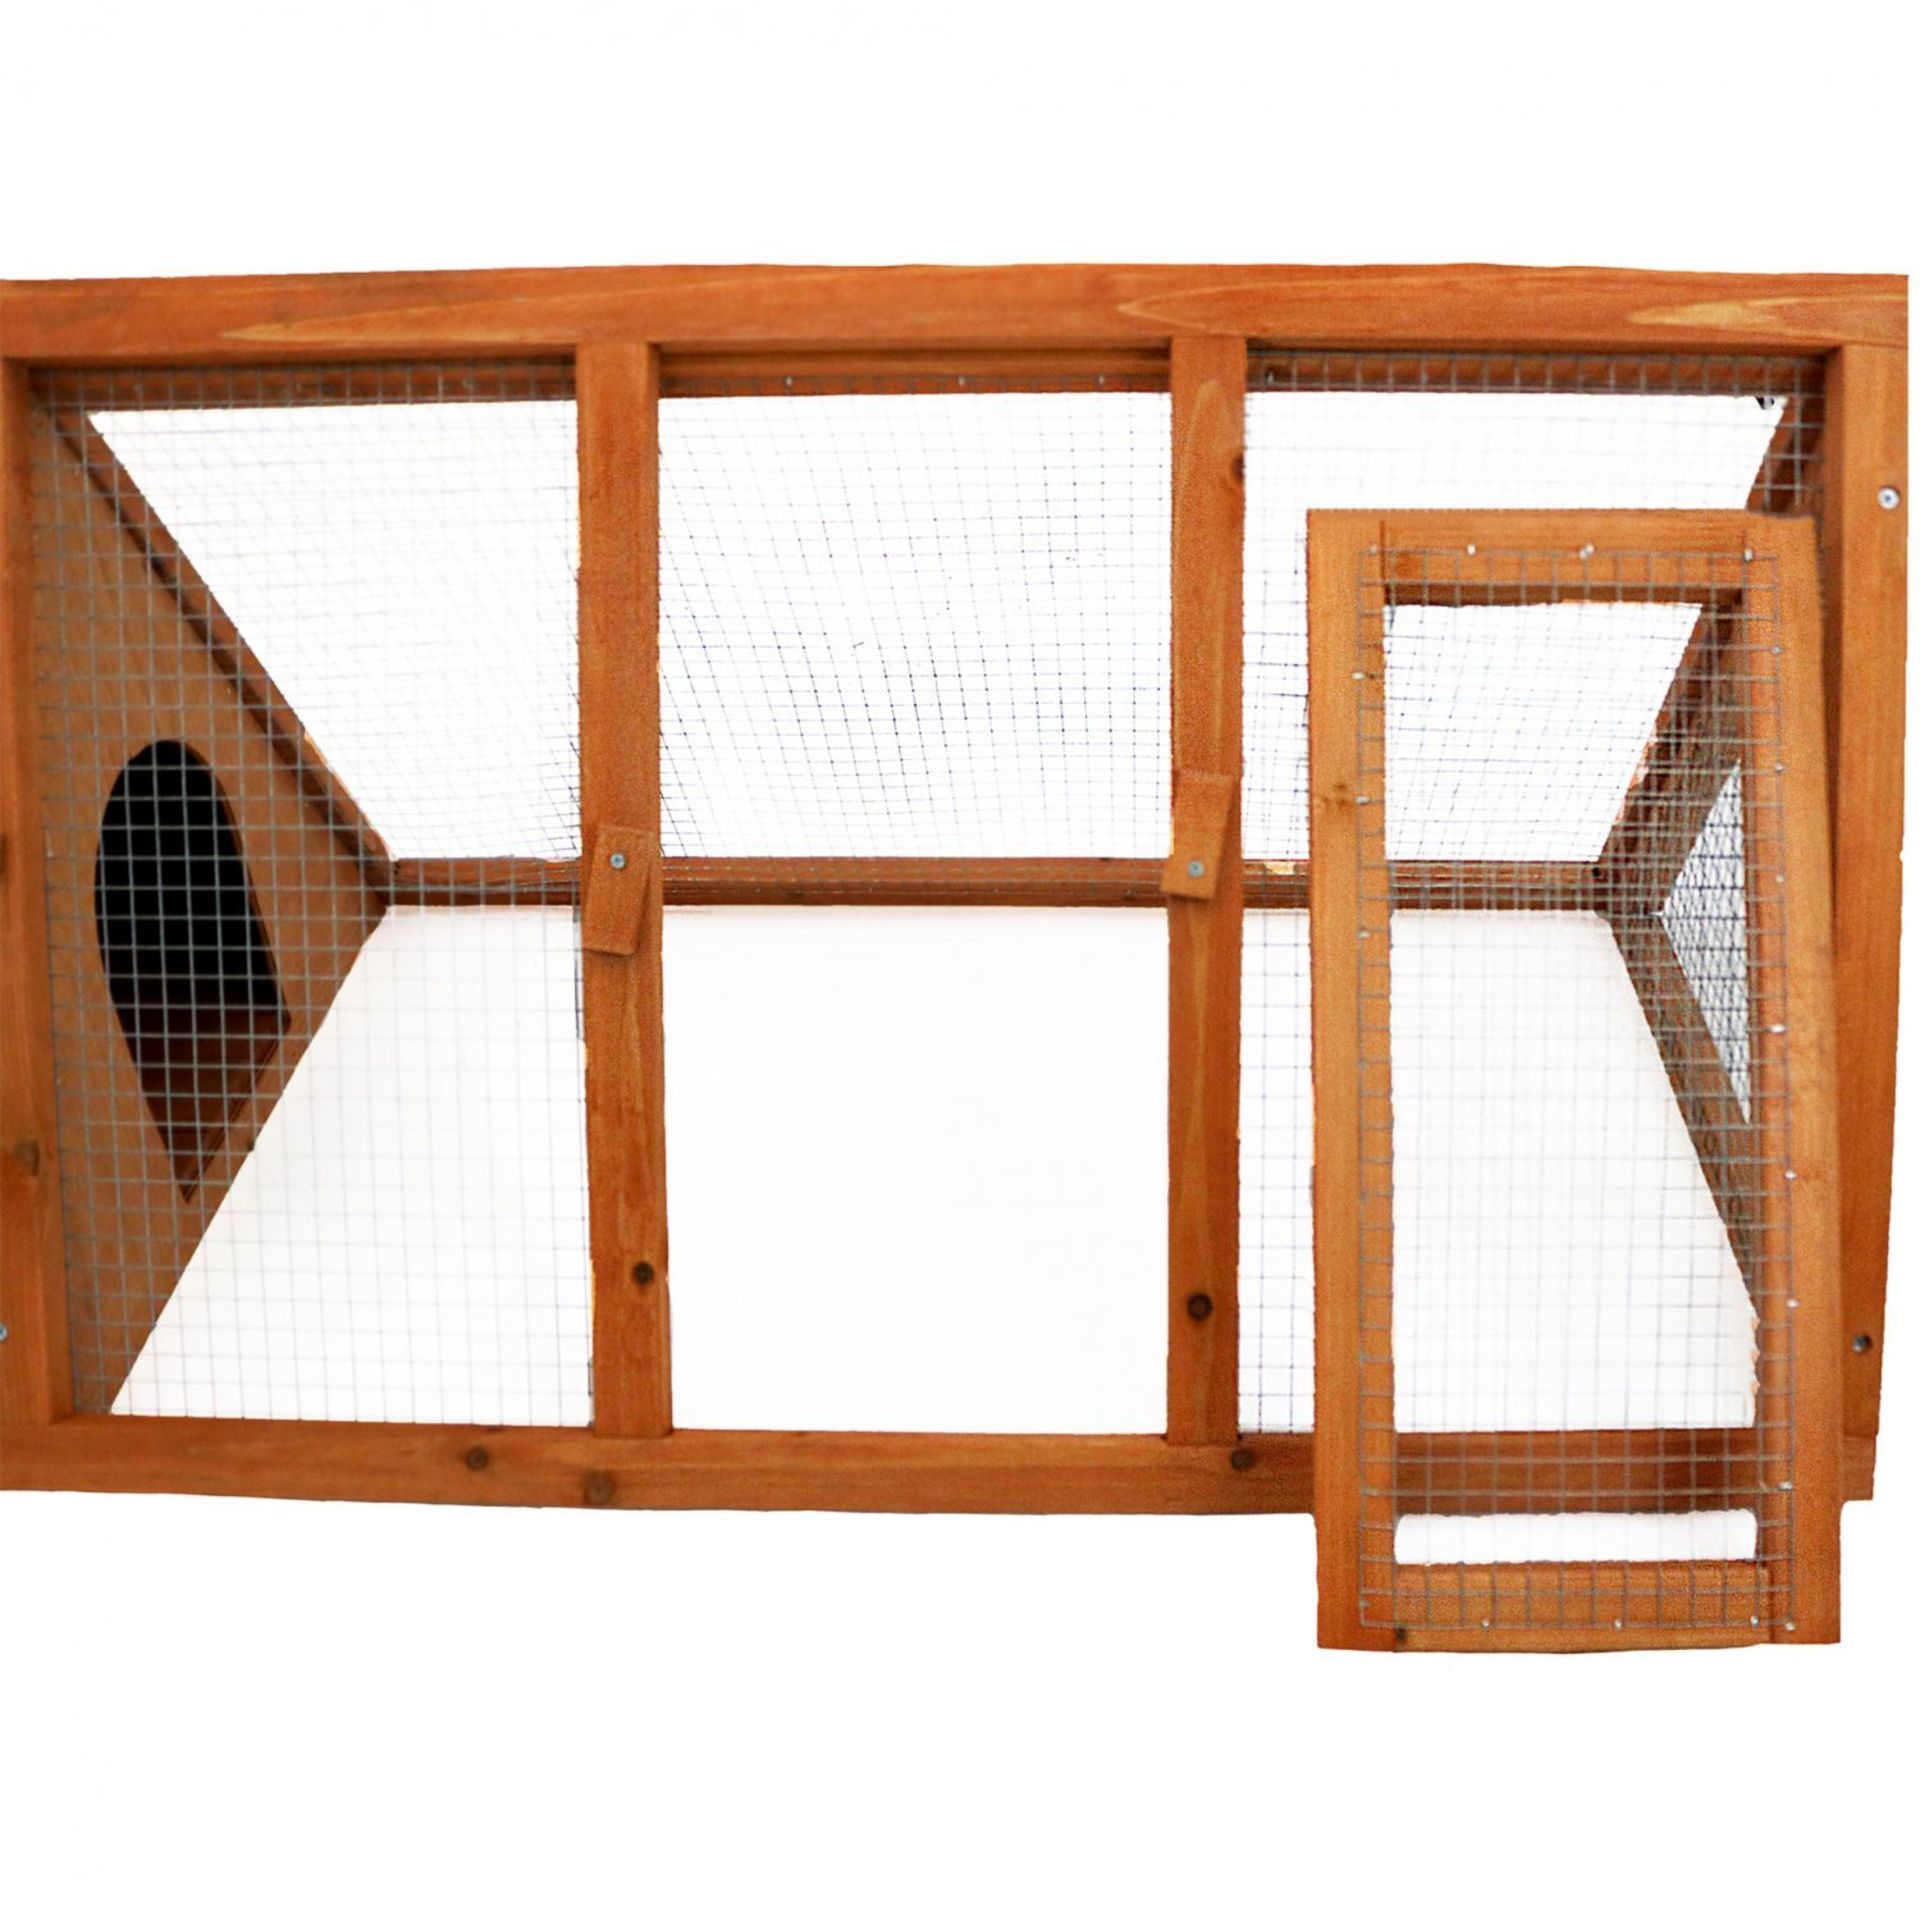 (PP537) Wooden Outdoor Triangle Rabbit Guinea Pig Pet Hutch Run Cage The triangle hutch is... - Image 2 of 2